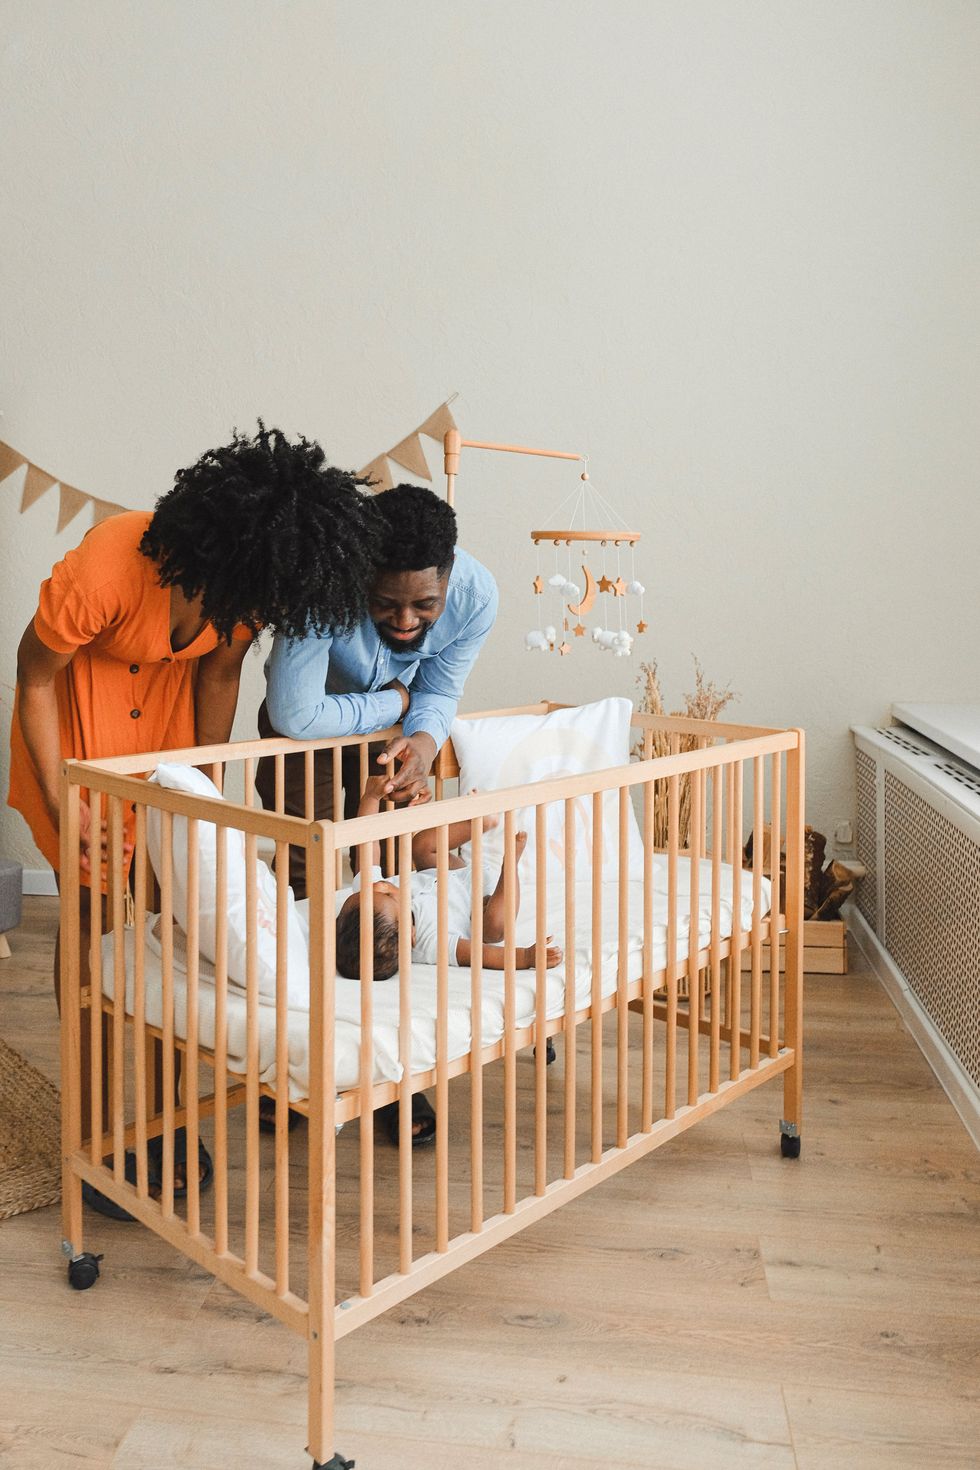 couple looking at infant in crib